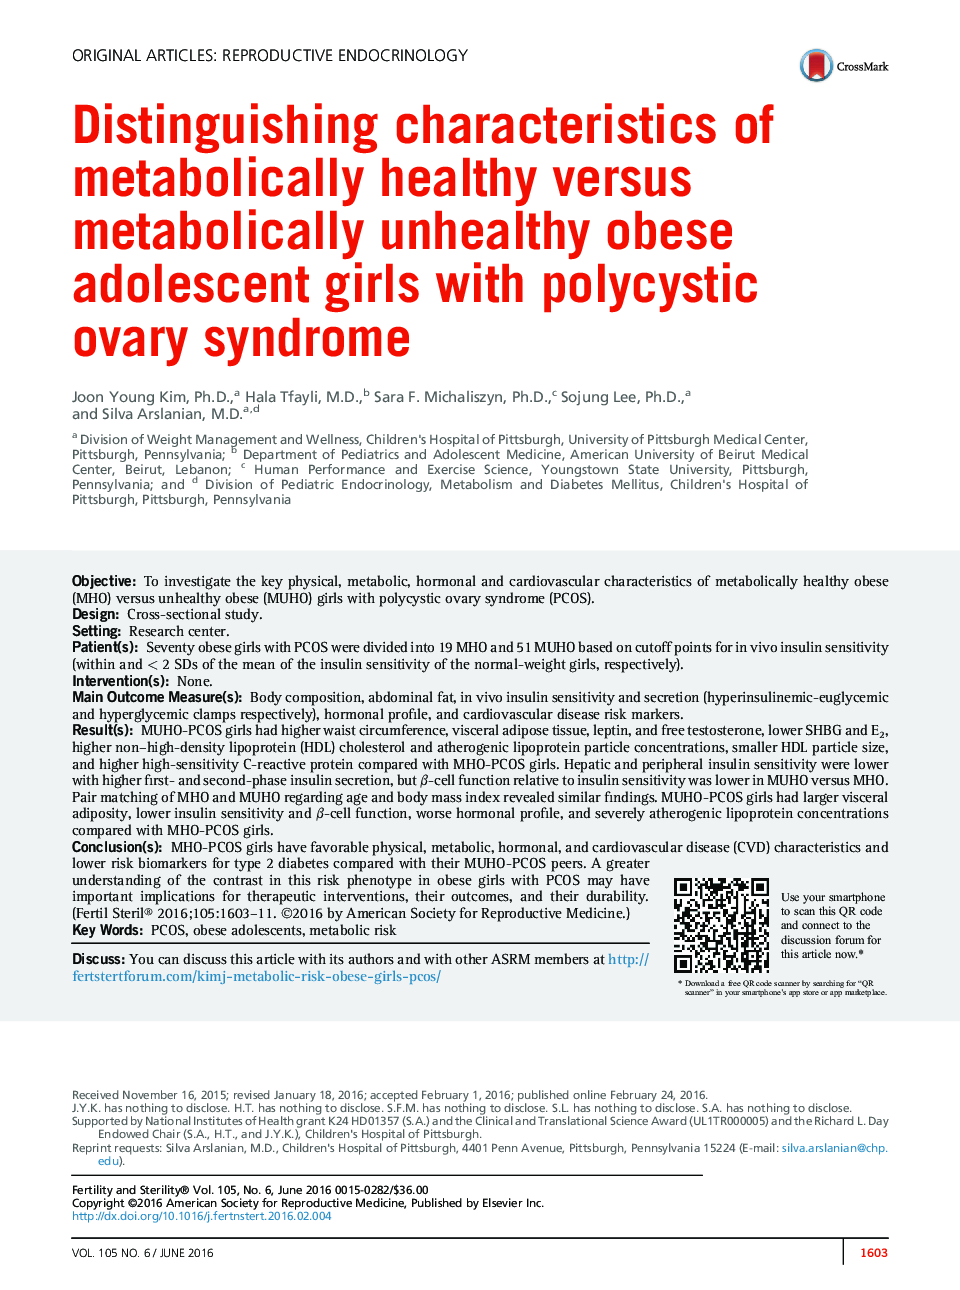 Distinguishing characteristics of metabolically healthy versus metabolically unhealthy obese adolescent girls with polycystic ovary syndrome